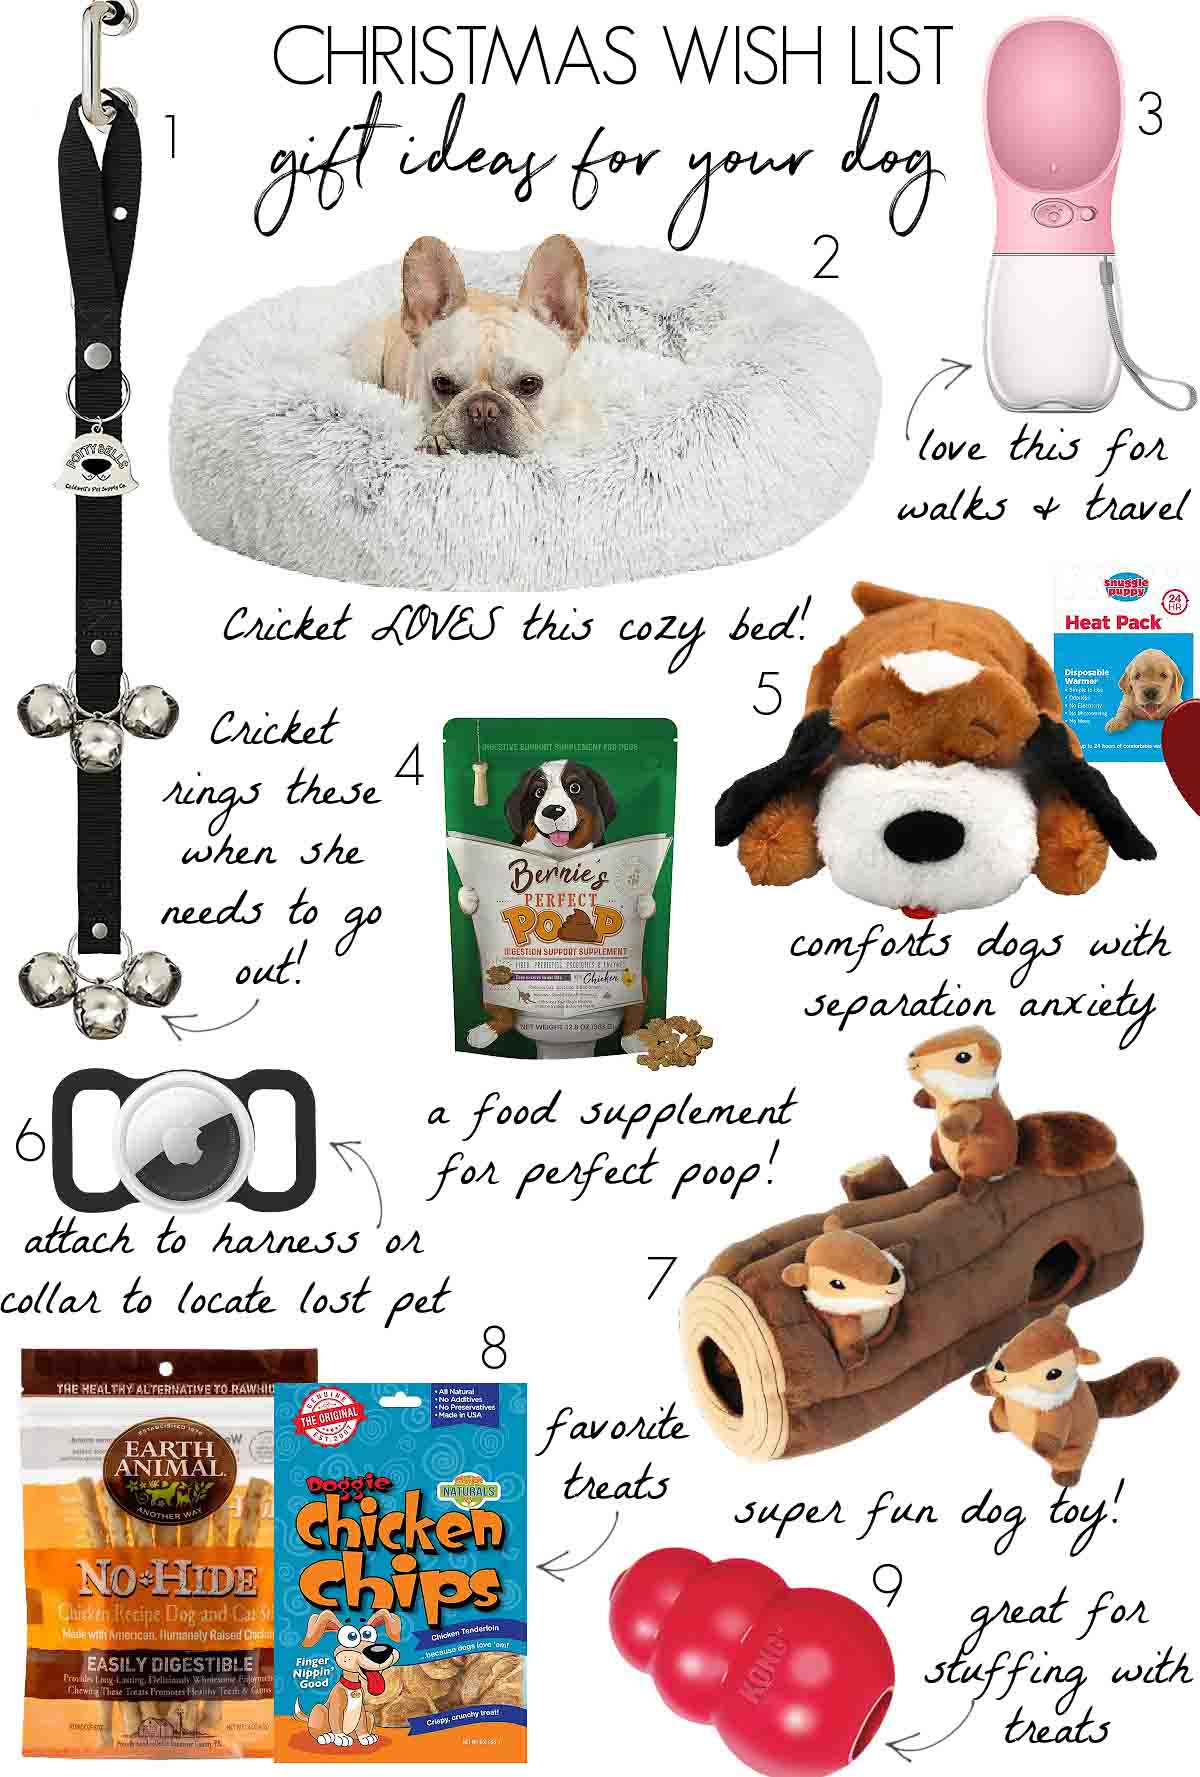 Christmas wish list gift ideas for dogs